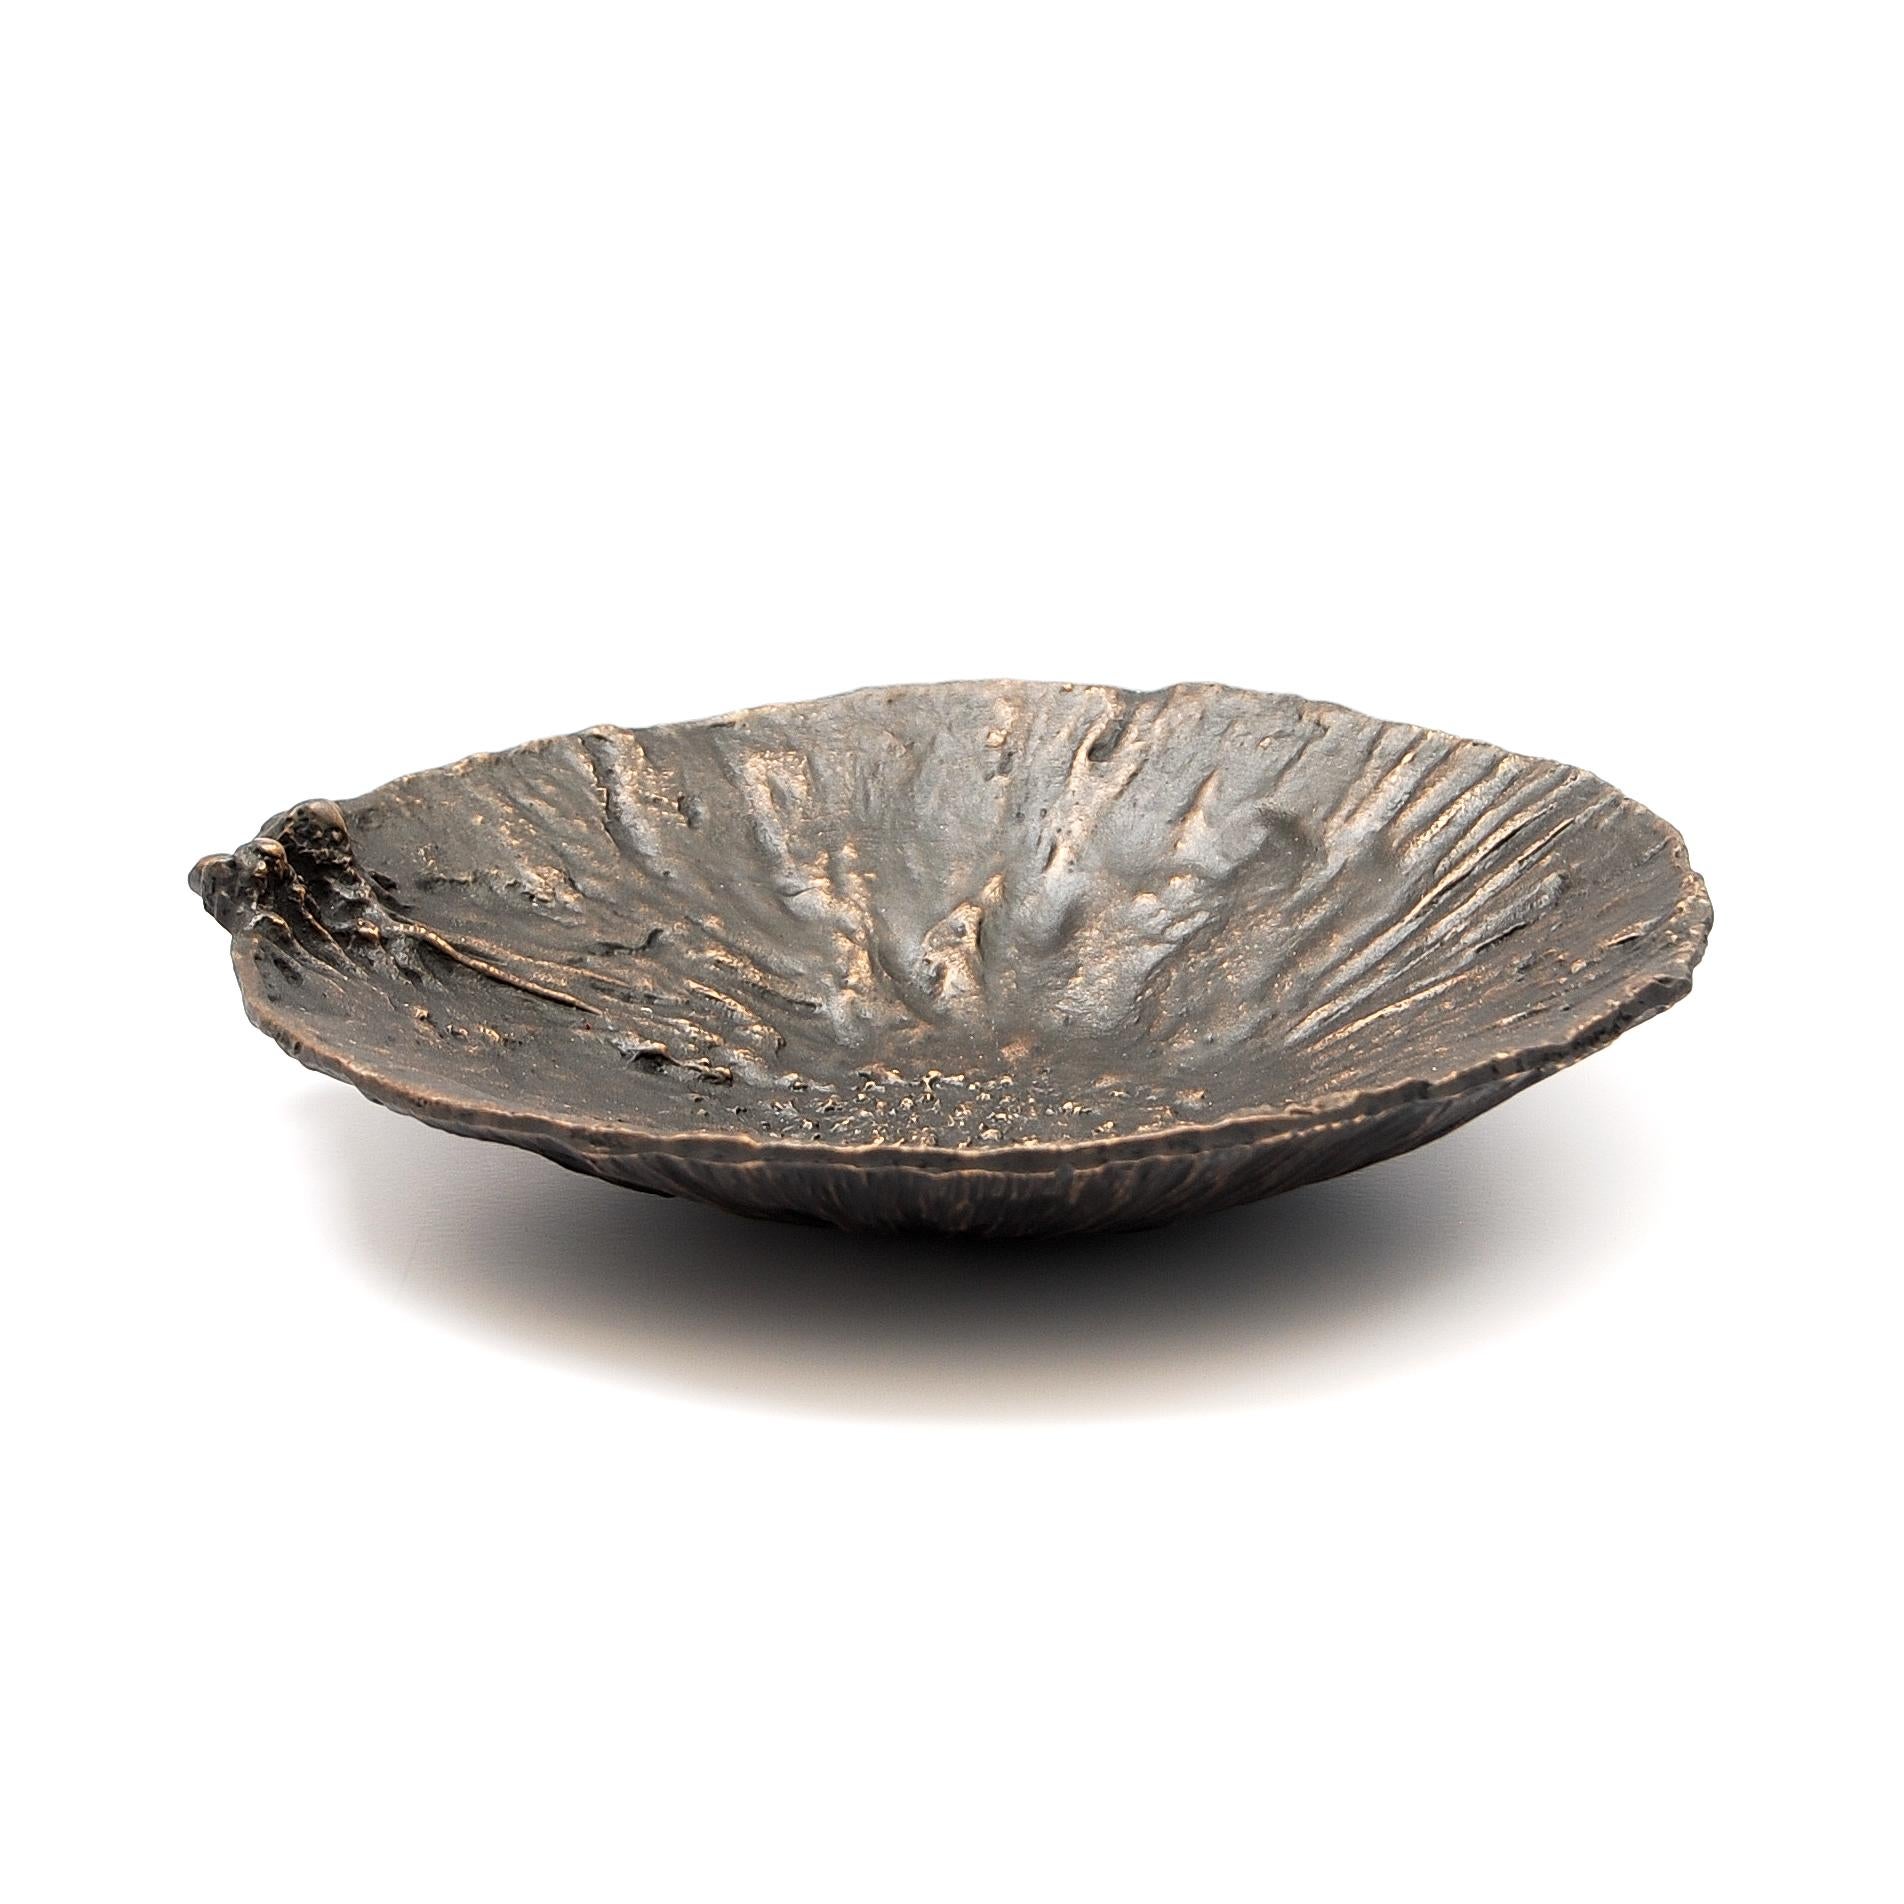 Nina bowl by Fakasaka Design
Dimensions: W 17 x D 17 x H 3.5 cm
Materials: black/brown bronze.

Nina bowl / ashtray / centerpiece / candle holder / card holder

 FAKASAKA is a design company focused on production of high-end furniture,